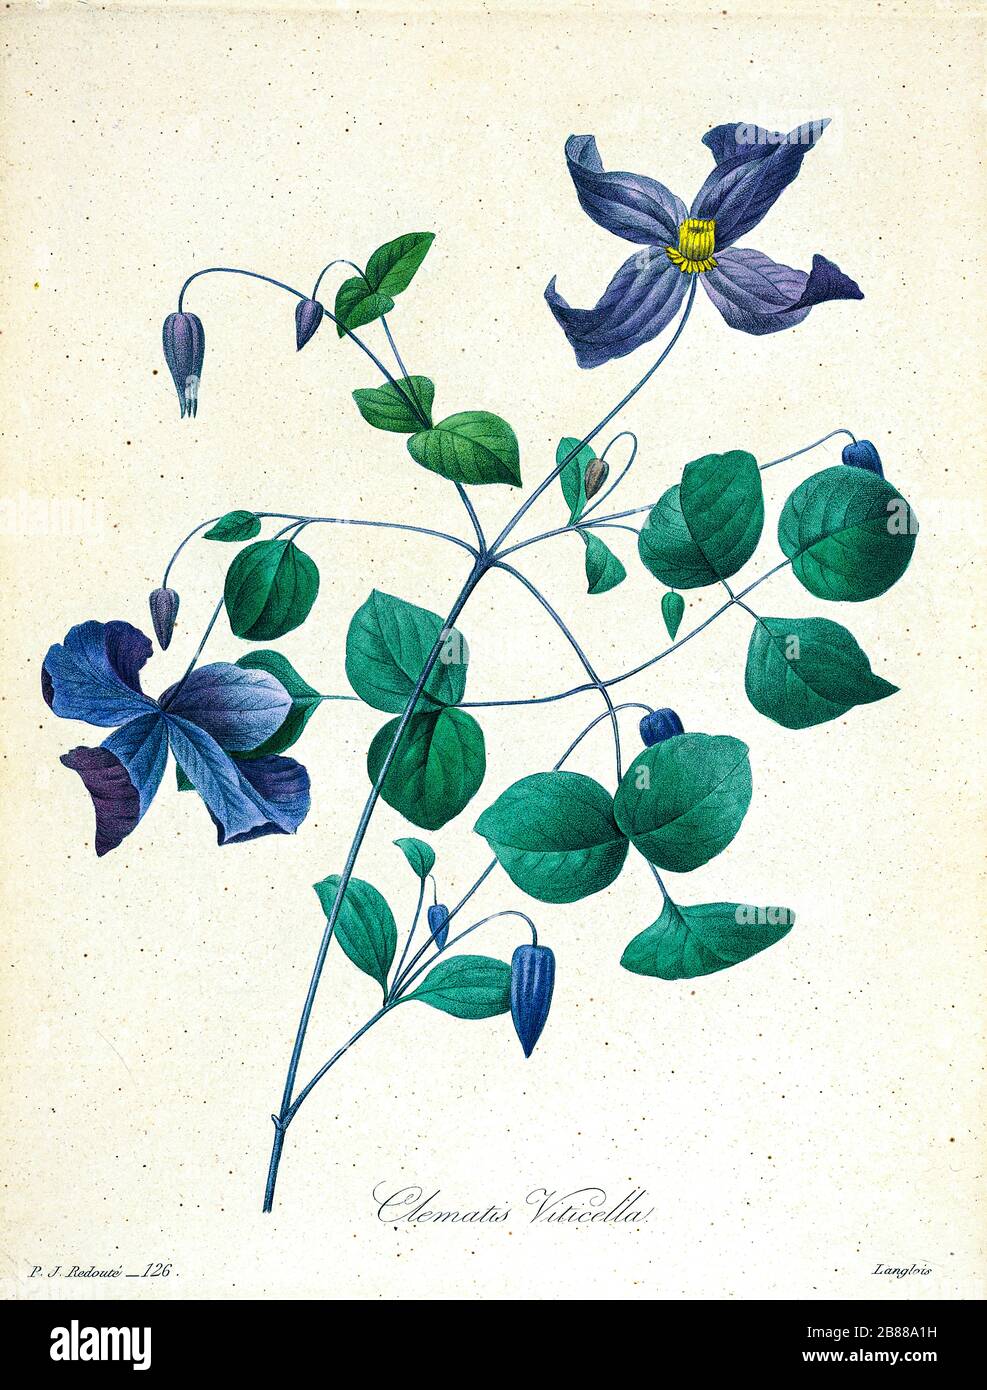 19th-century hand painted Engraving illustration of a Clematis viticella, the Italian leather flower, purple clematis, or 'Virgin's bower', is a species of flowering plant in the buttercup family; it is native to Europe. By Pierre-Joseph Redoute. Published in Choix Des Plus Belles Fleurs, Paris (1827). by Redouté, Pierre Joseph, 1759-1840.; Chapuis, Jean Baptiste.; Ernest Panckoucke.; Langois, Dr.; Bessin, R.; Victor, fl. ca. 1820-1850. Stock Photo